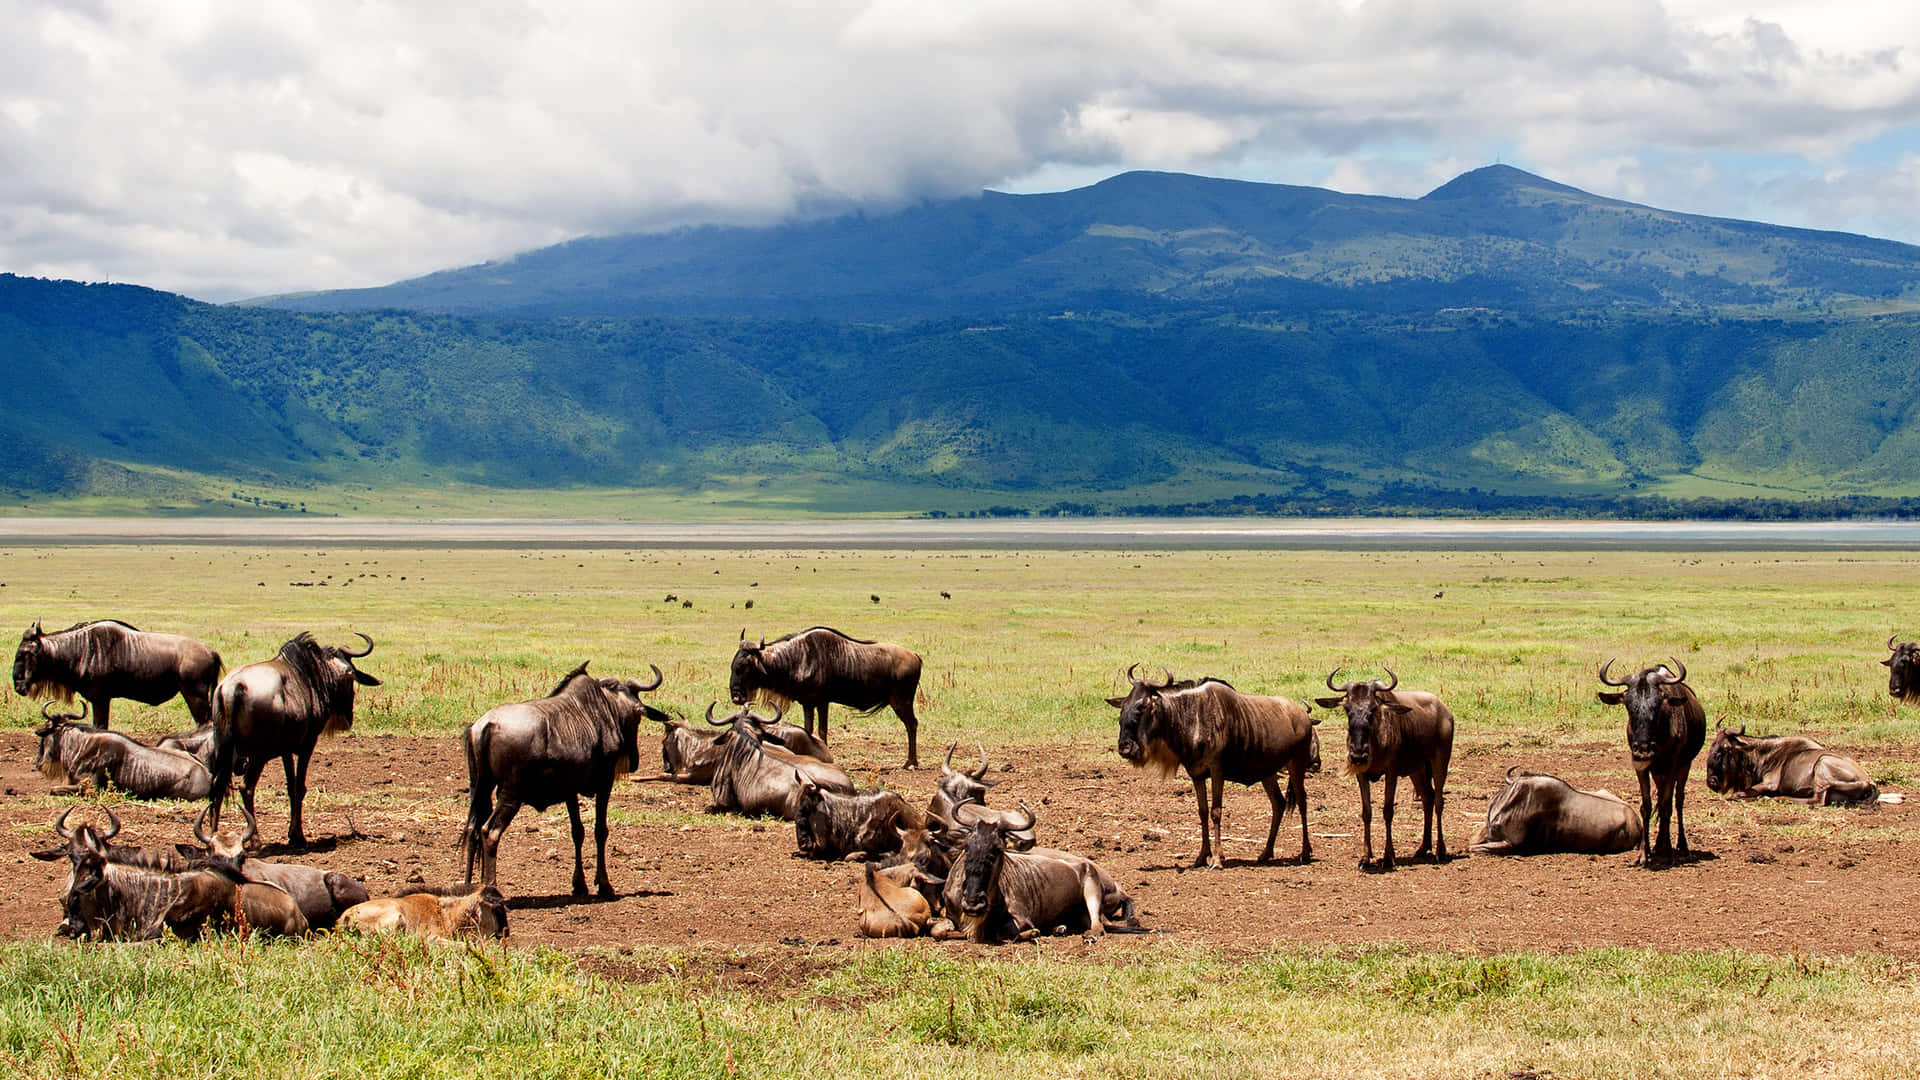 Wildebeest Grazing by Lake Magadi in the Picturesque Ngorongoro Crater Wallpaper